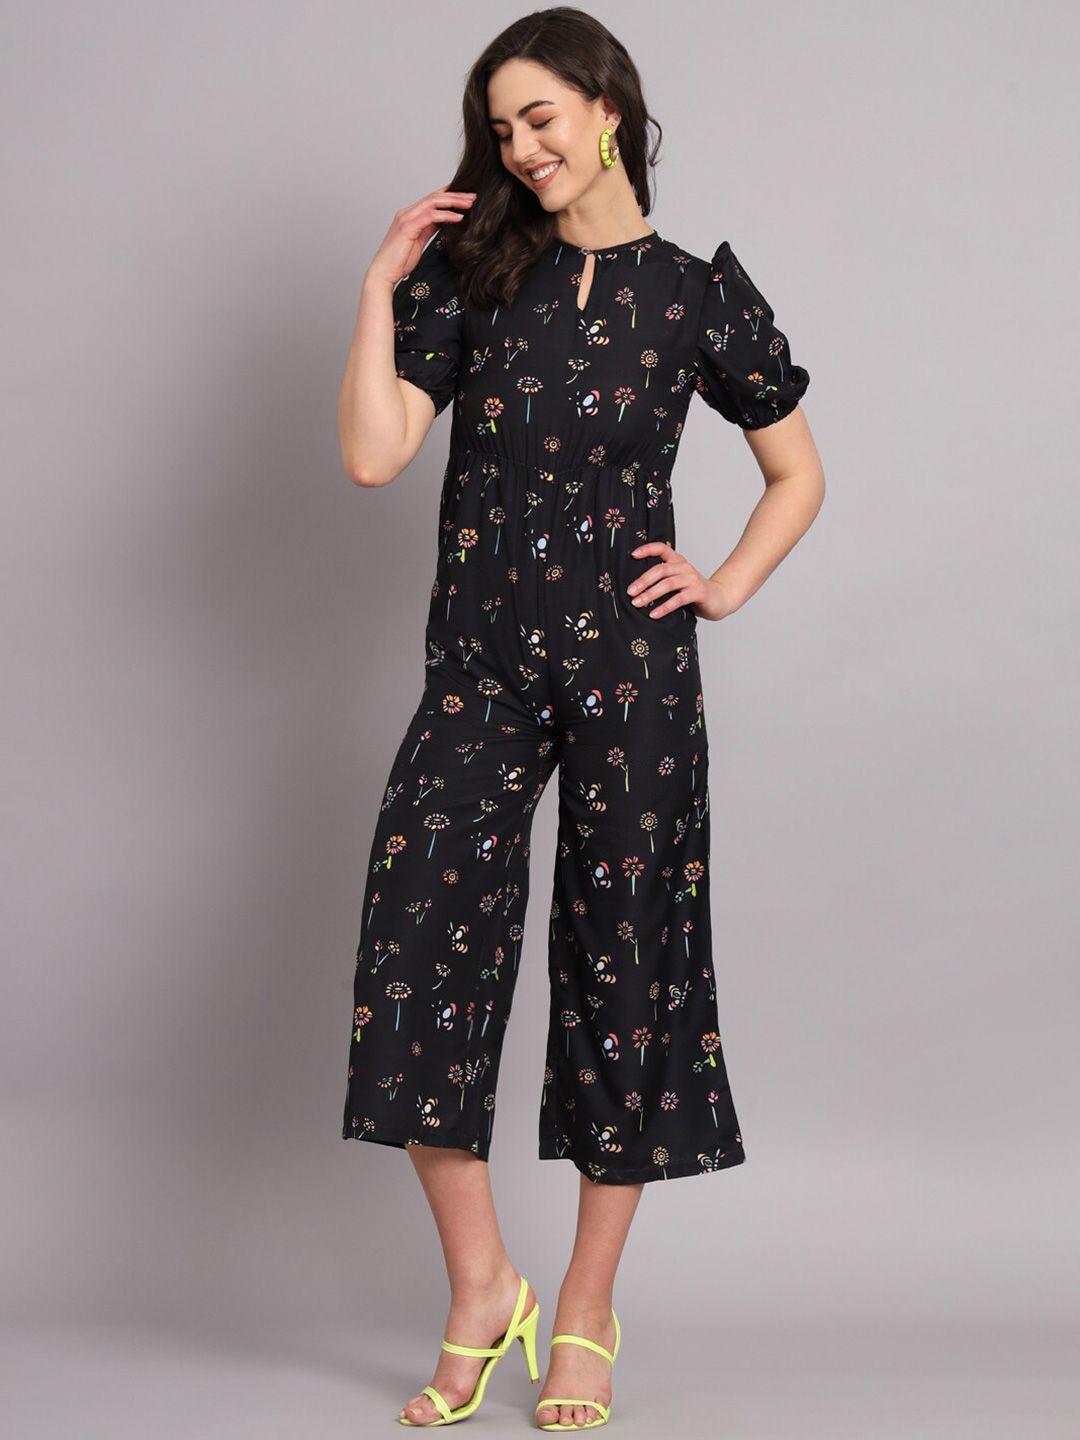 the dry state black & pink floral printed overall capri jumpsuit